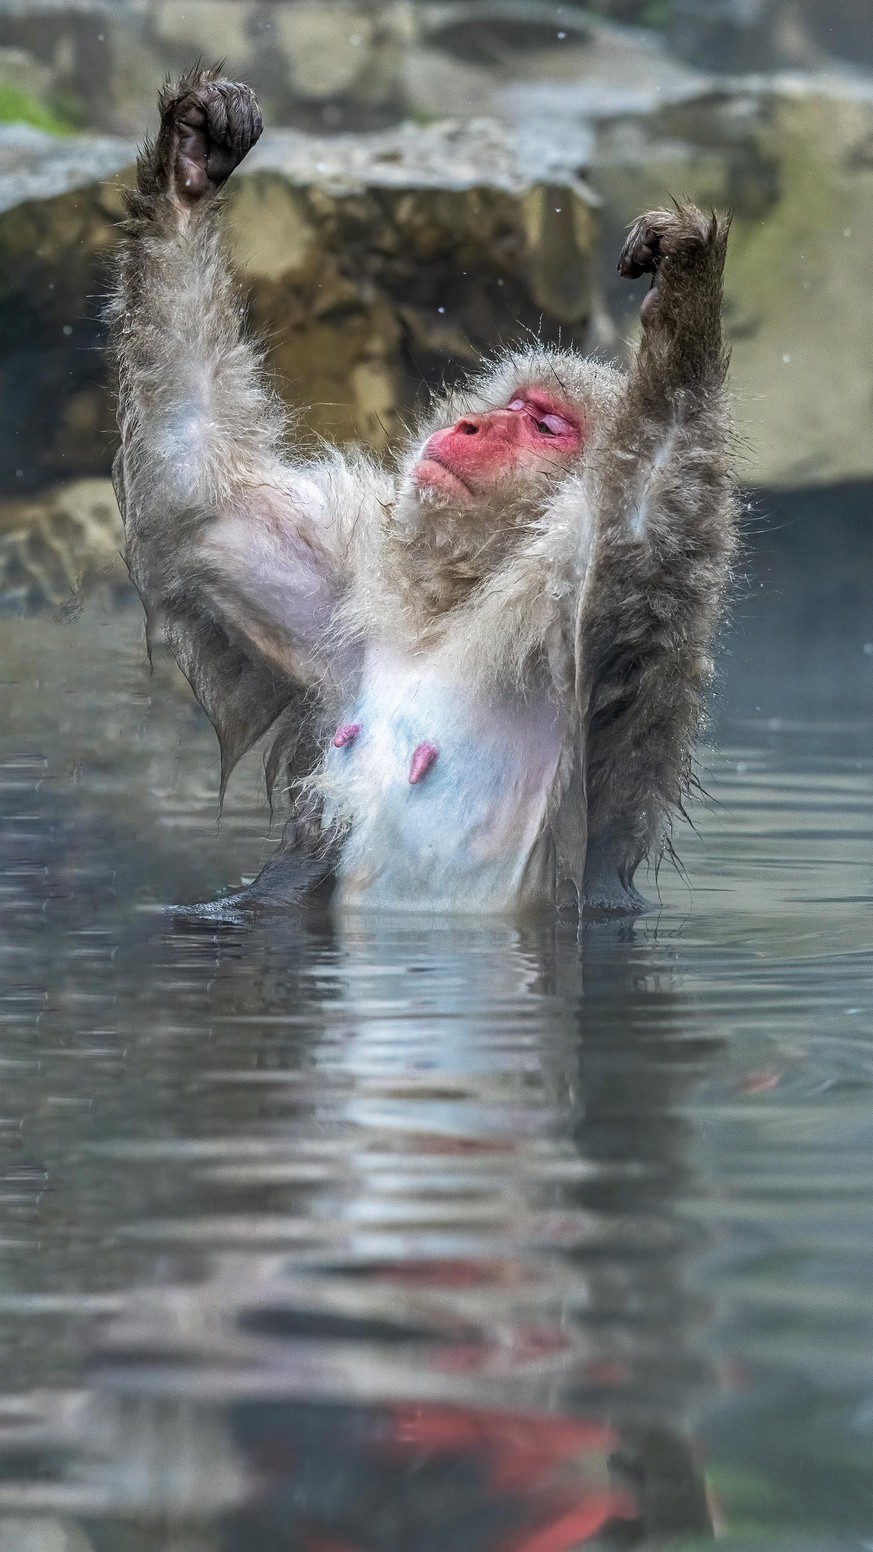 The Comedy Wildlife Photography Awards 2020
Ramesh Letchmanan
Singapore
Singapore
Phone: 
Email: 
Title: I Am Champion
Description: A half-submerged snow monkey declares itself a champion by raising b ...